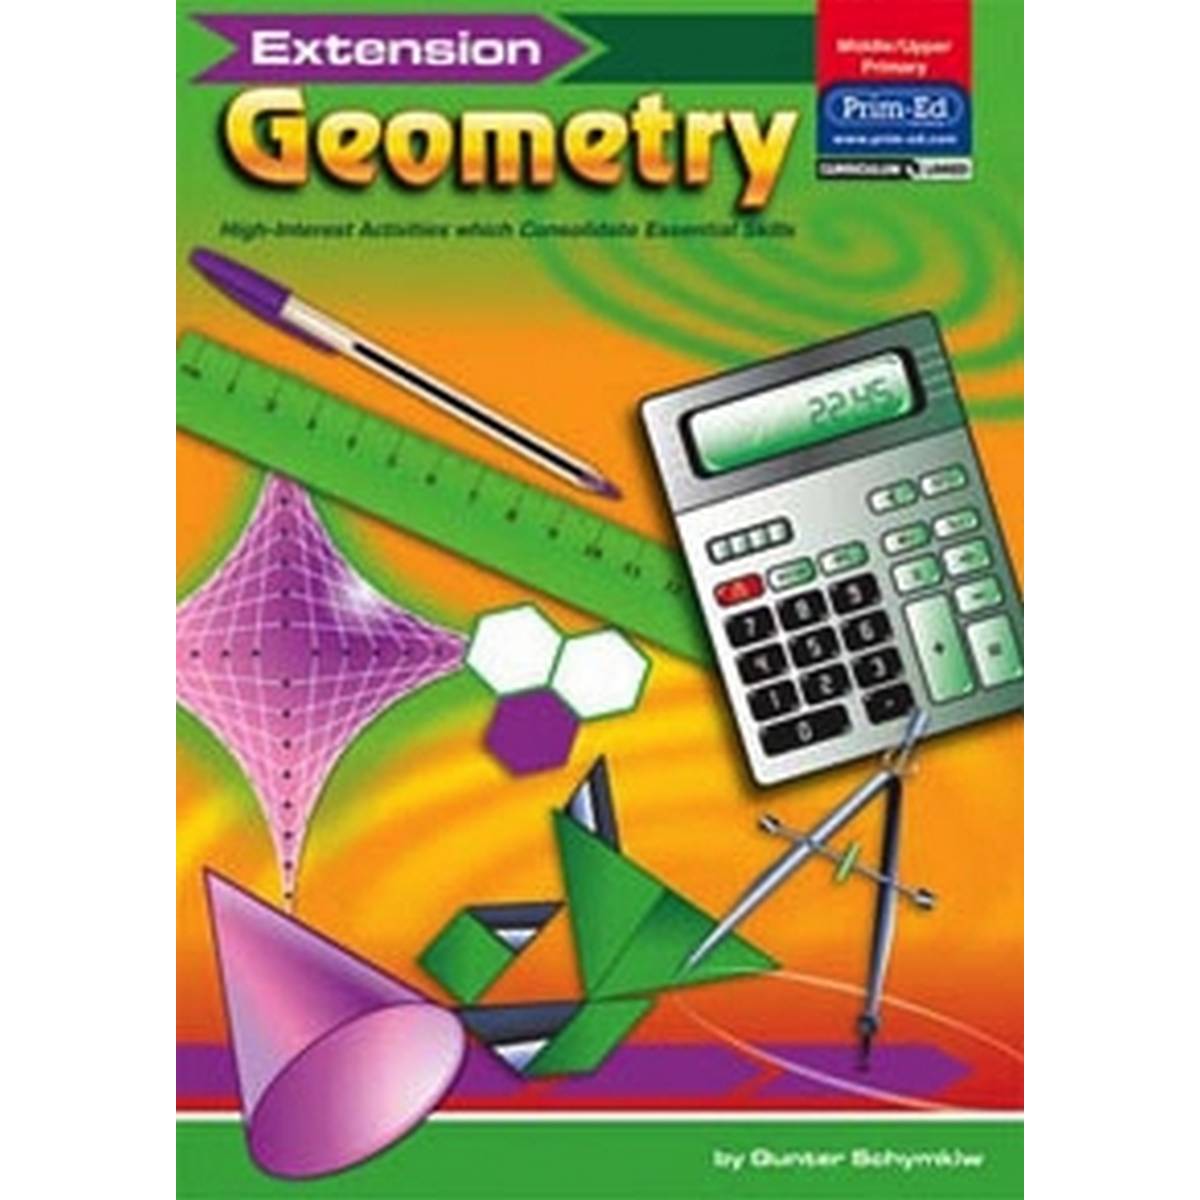 Extension Geometry